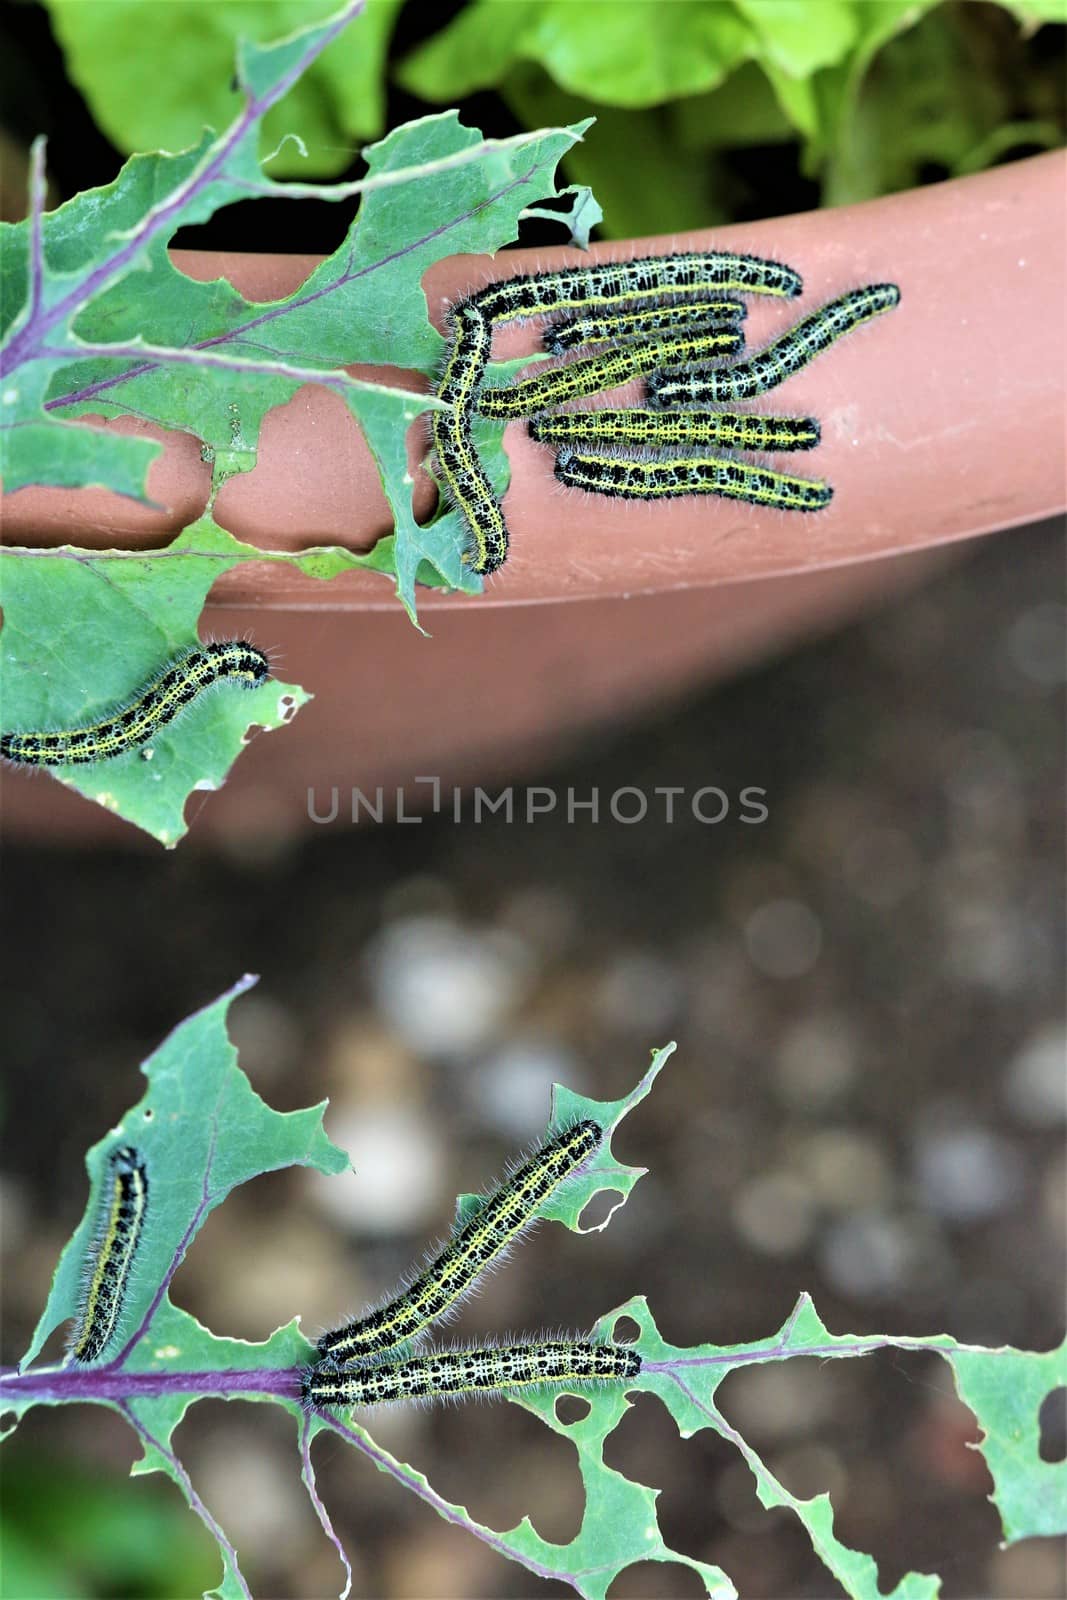 Close-up of some cabbage caterpillars on an eaten cabbage leaf and some more on the edge of a brown flowerpot